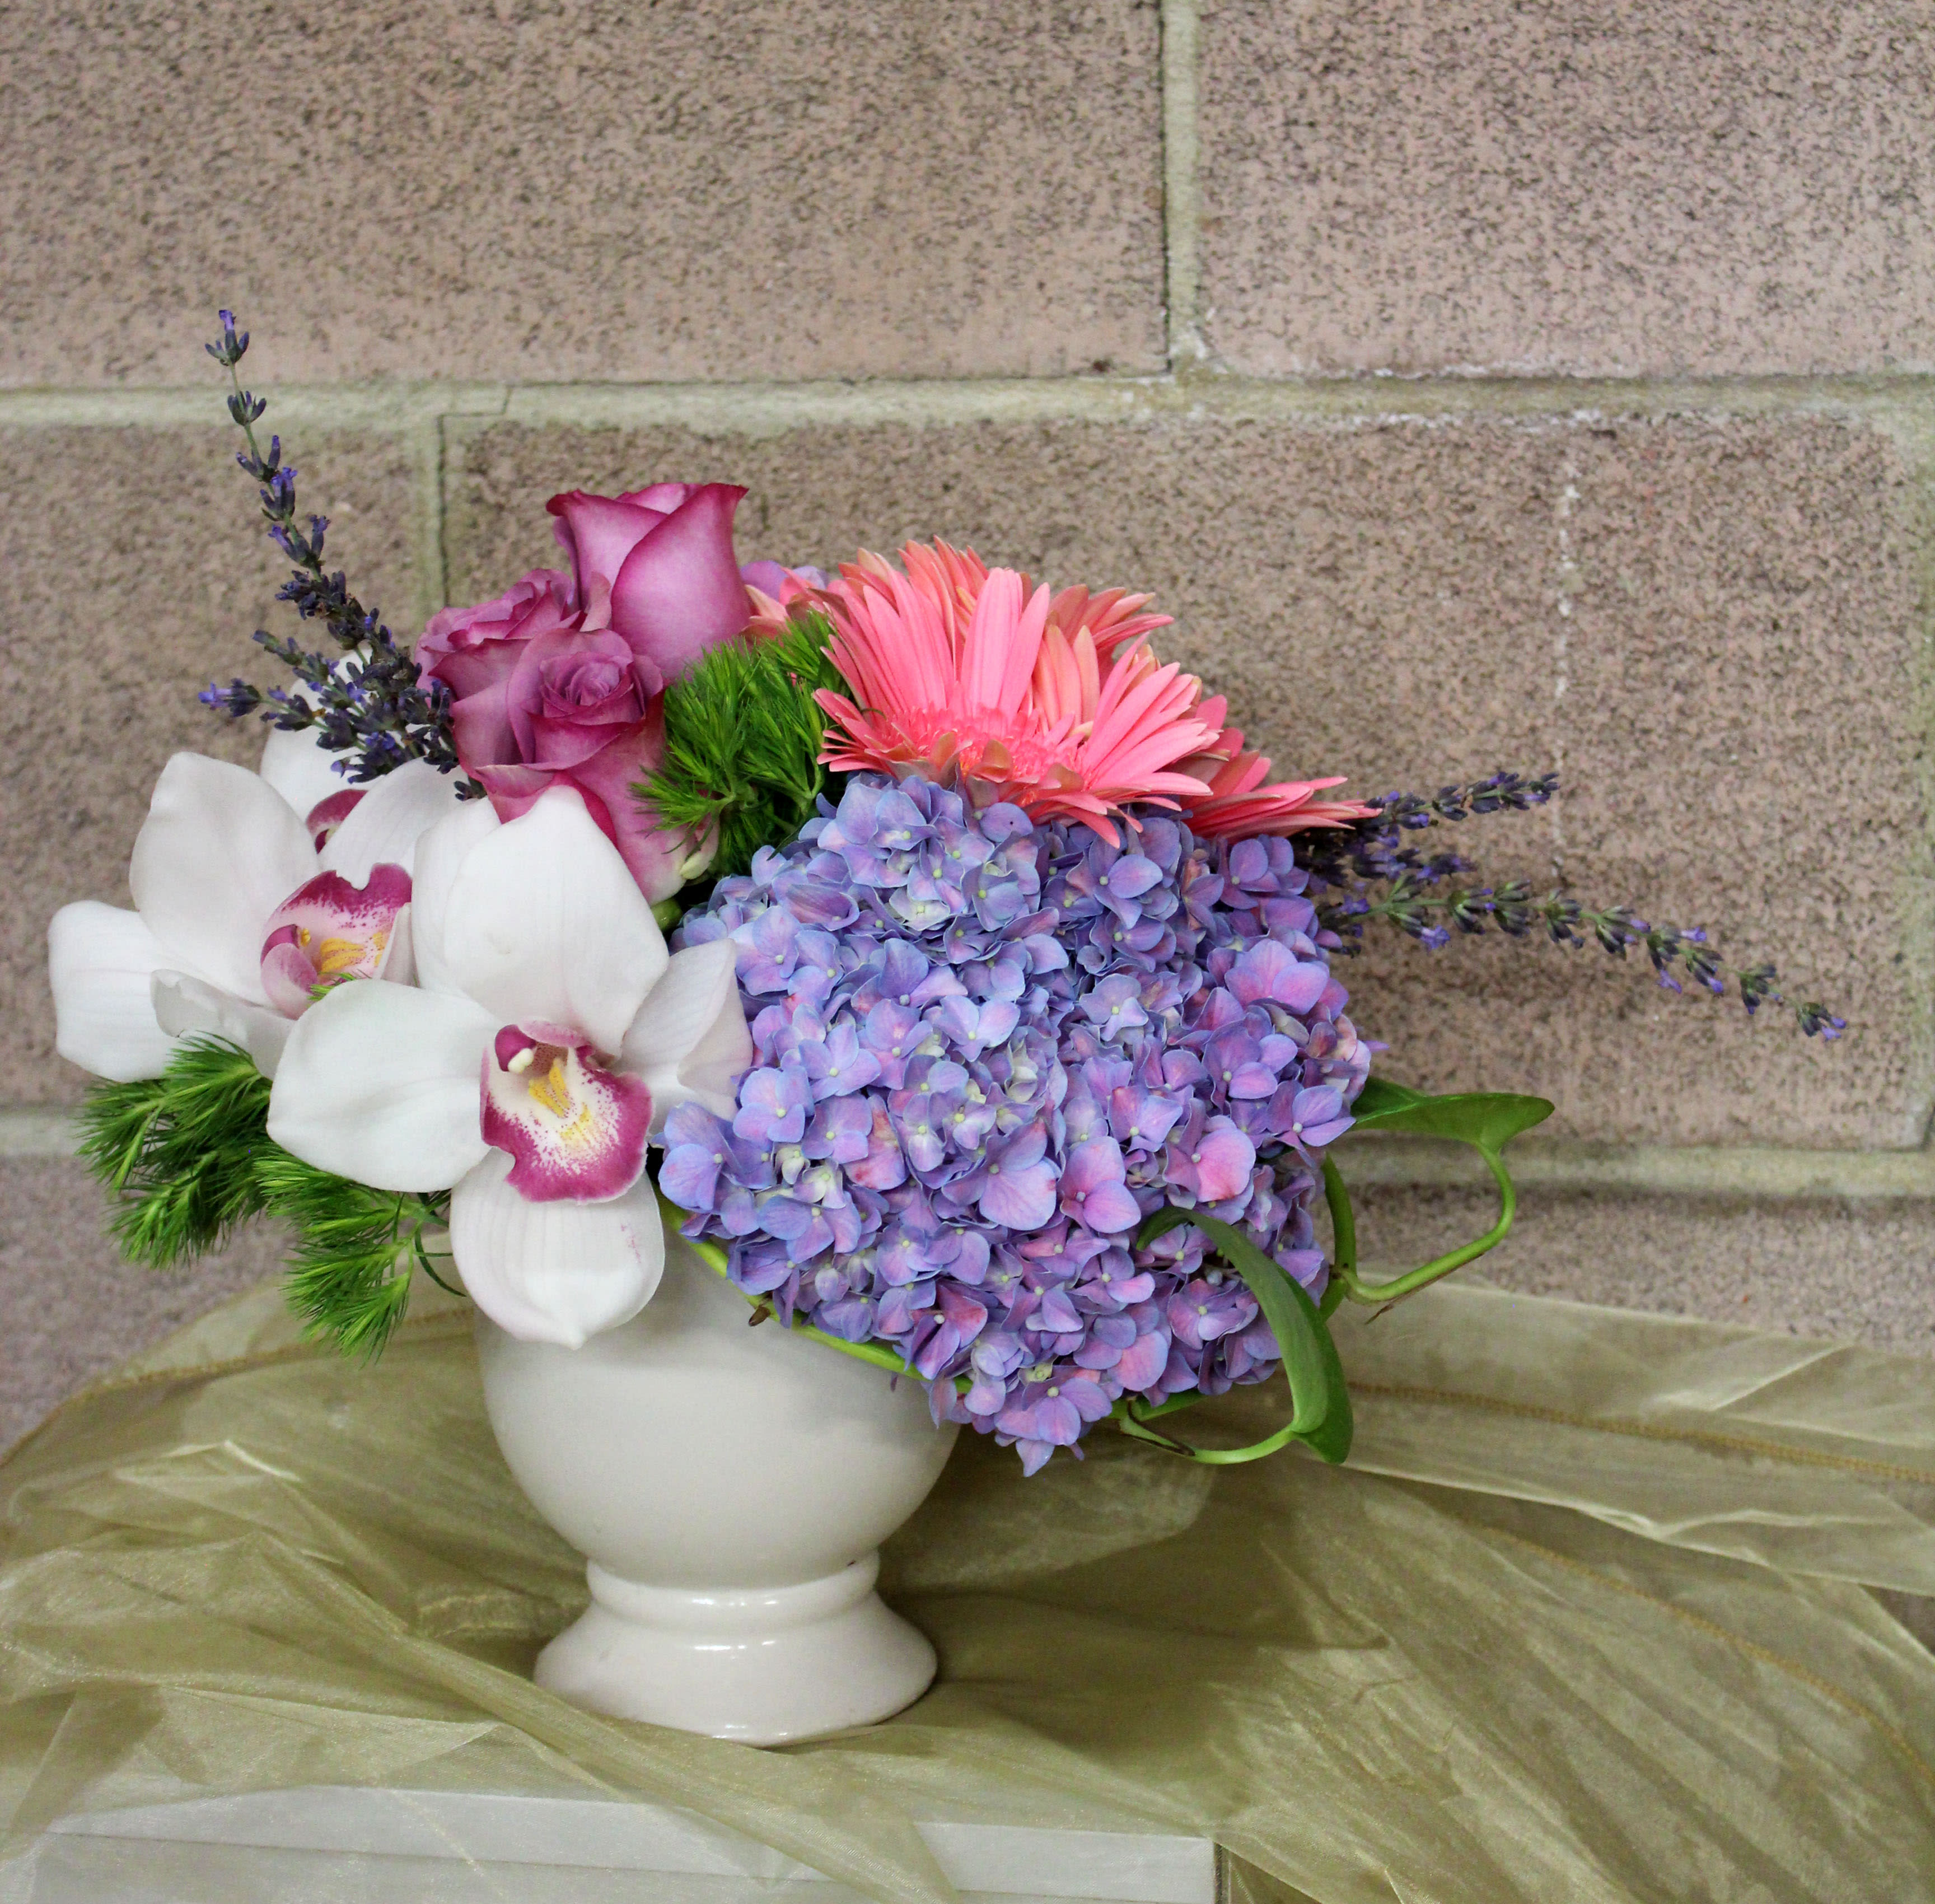 Flower Lovers Bouquet - Hydrangeas, orchids and roses - what more could you ask for?